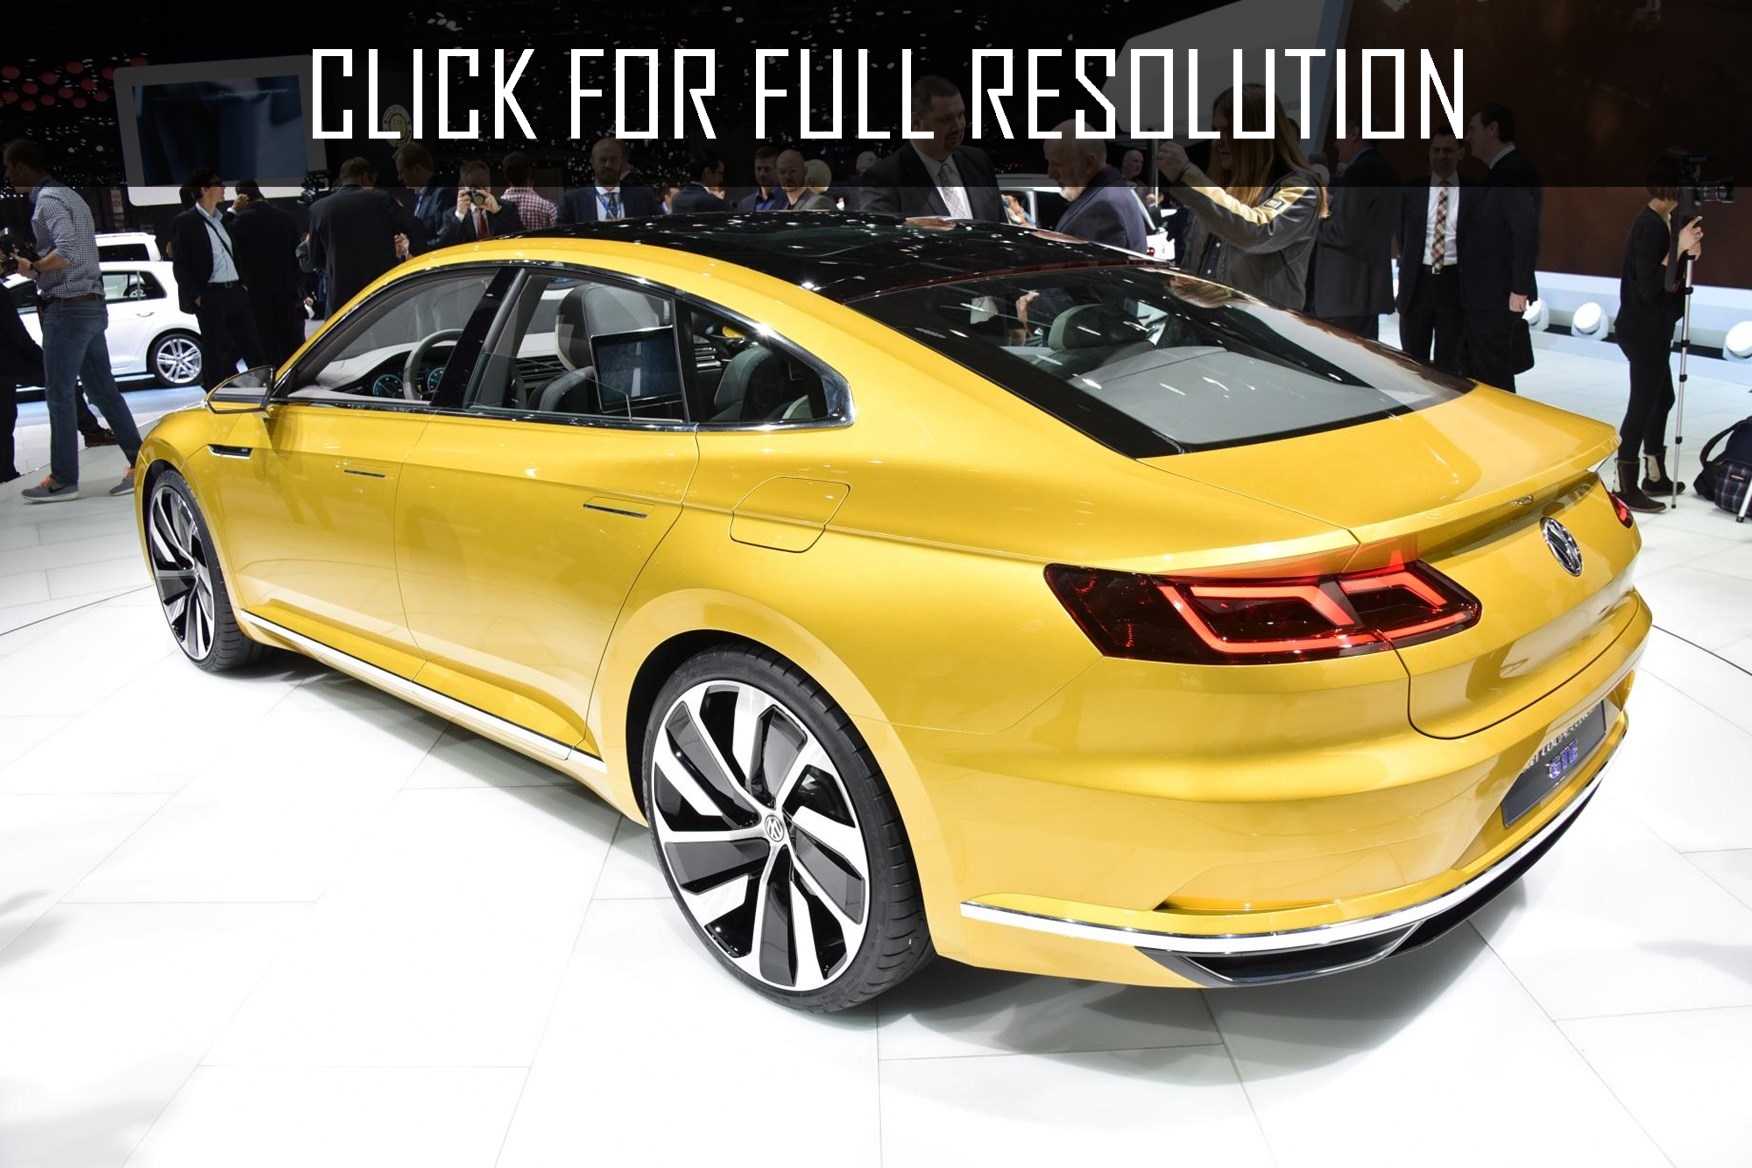 Volkswagen Cc Concept amazing photo gallery, some information and